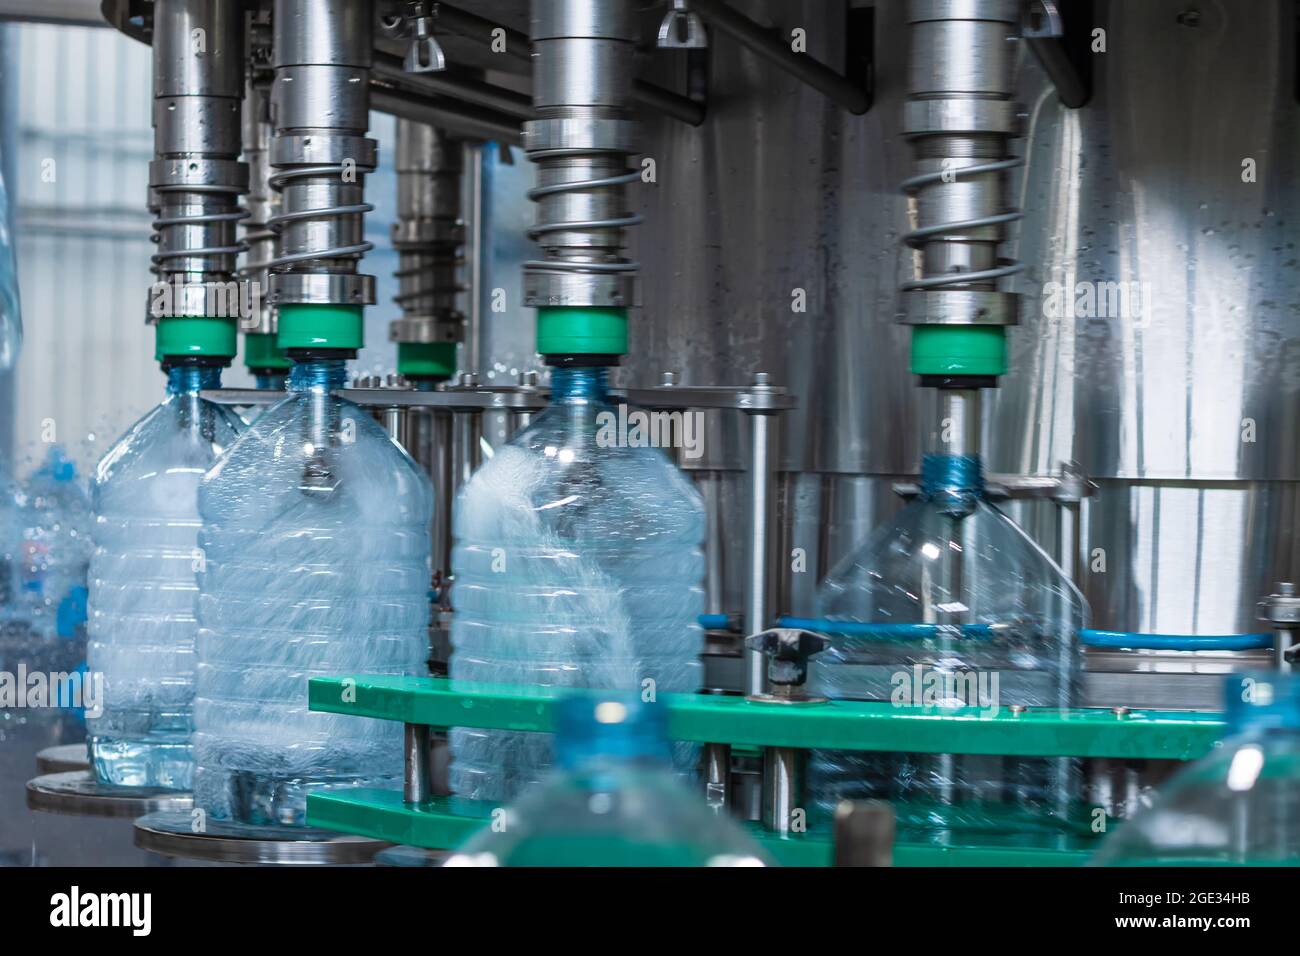 Five-liter plastic bottles in the process of filling with water in a filling machine. Food production Stock Photo